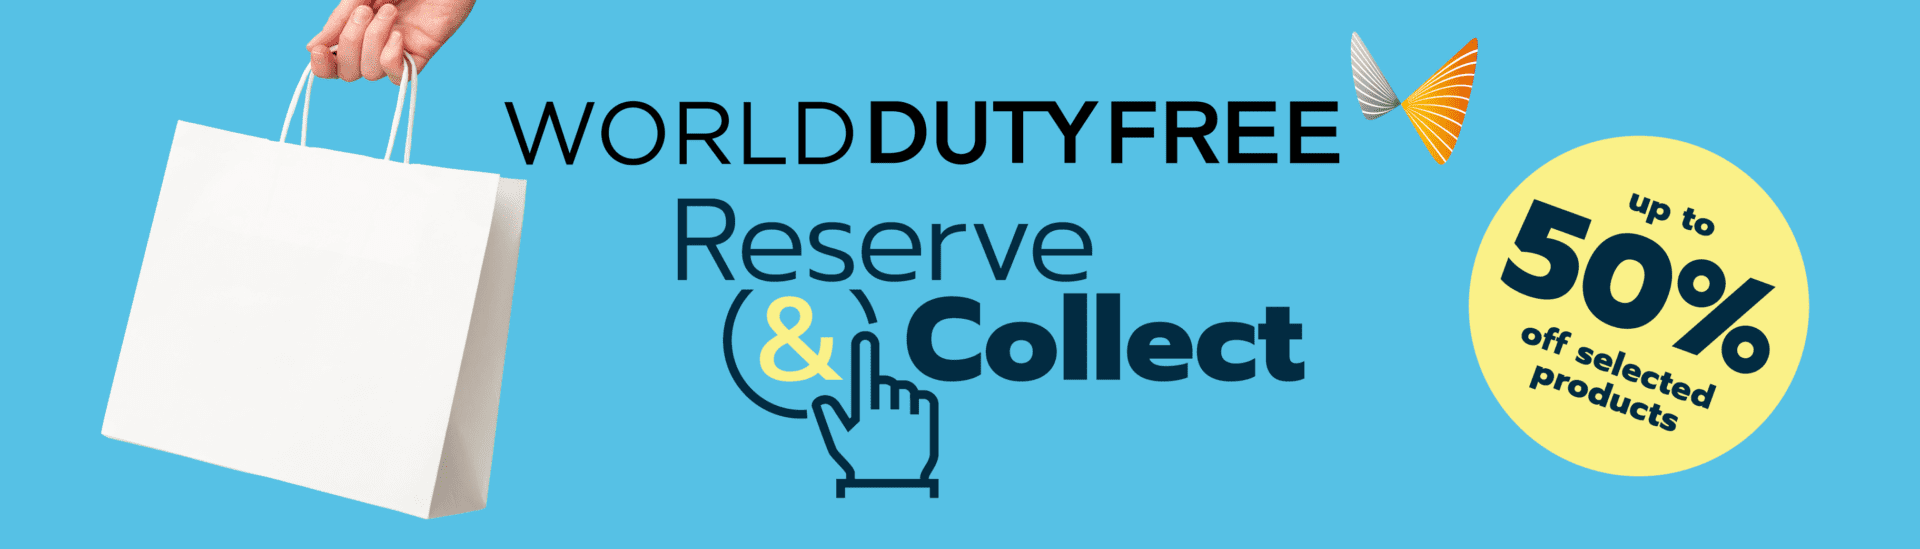 Up to 50% off selected products when you Reserve & Collect at World Duty Free at London Southend Airport